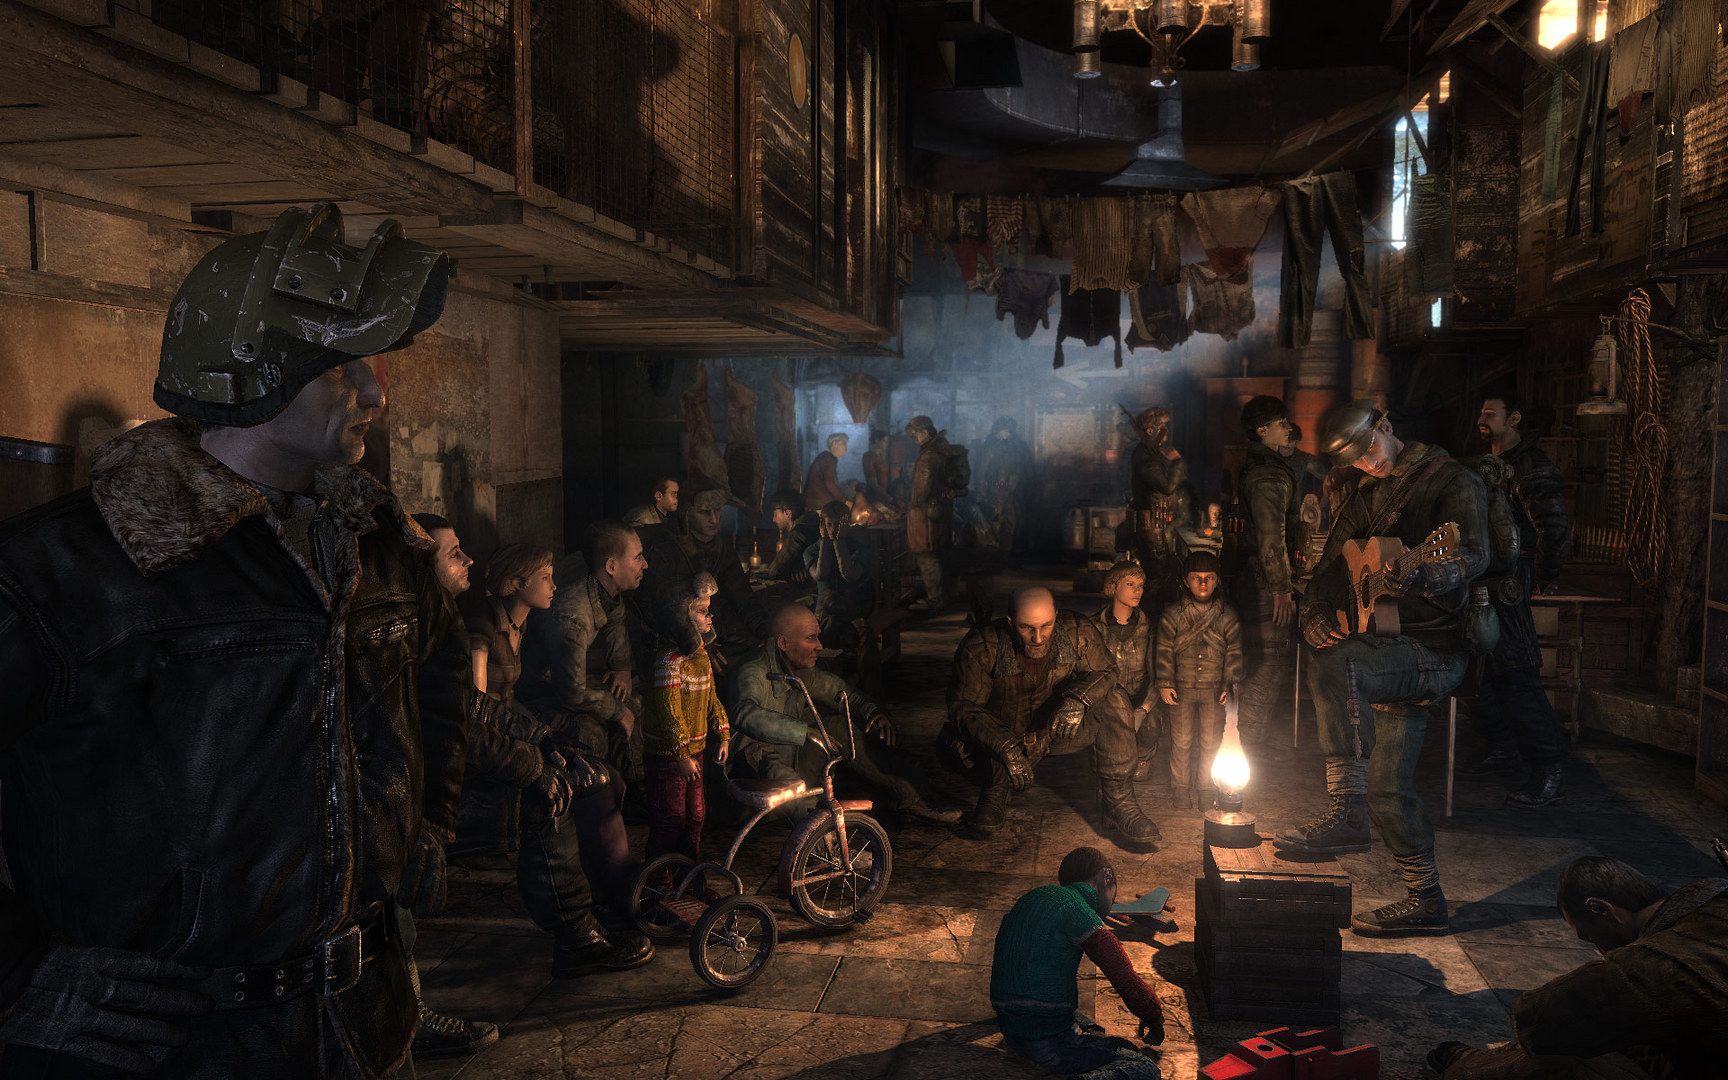 Steam Offers Metro 2033 for Free